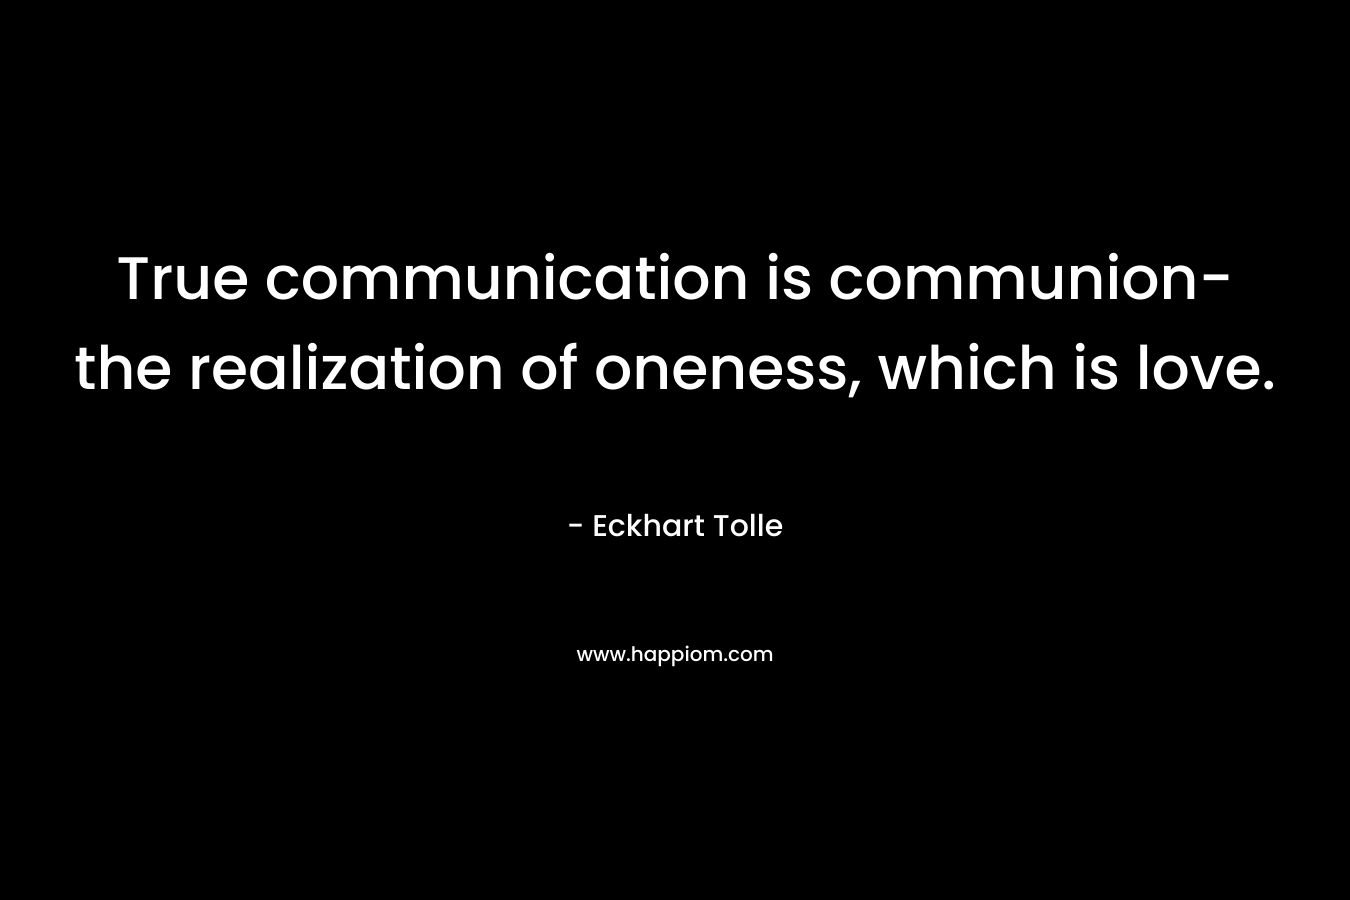 True communication is communion- the realization of oneness, which is love. – Eckhart Tolle